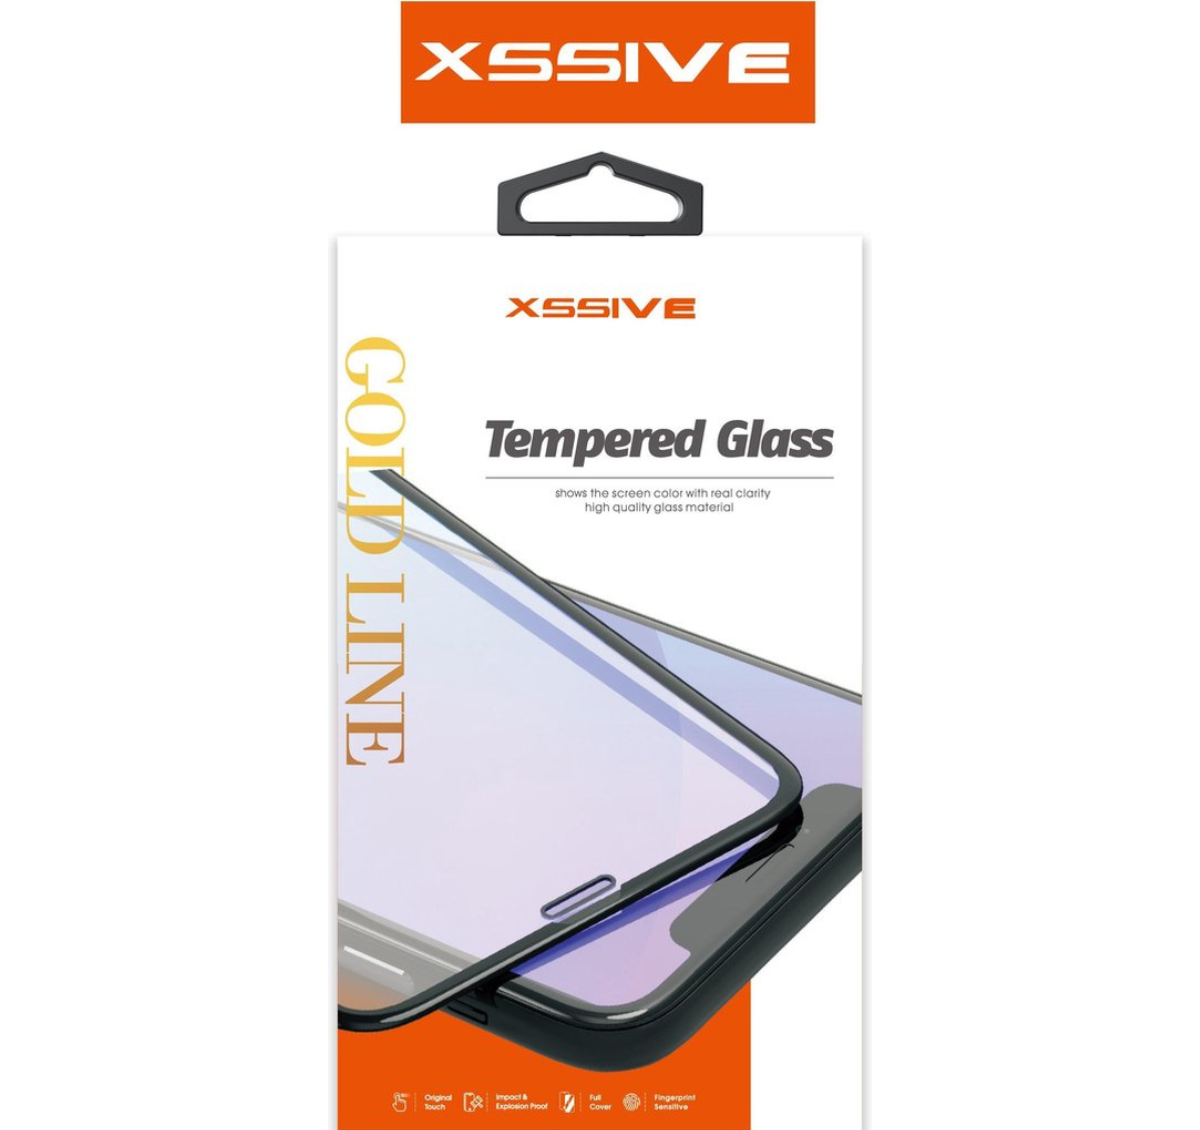 Xssive Screen Protector - Full Cover Glass Film for Samsung Galaxy S22 - Tempered Glass